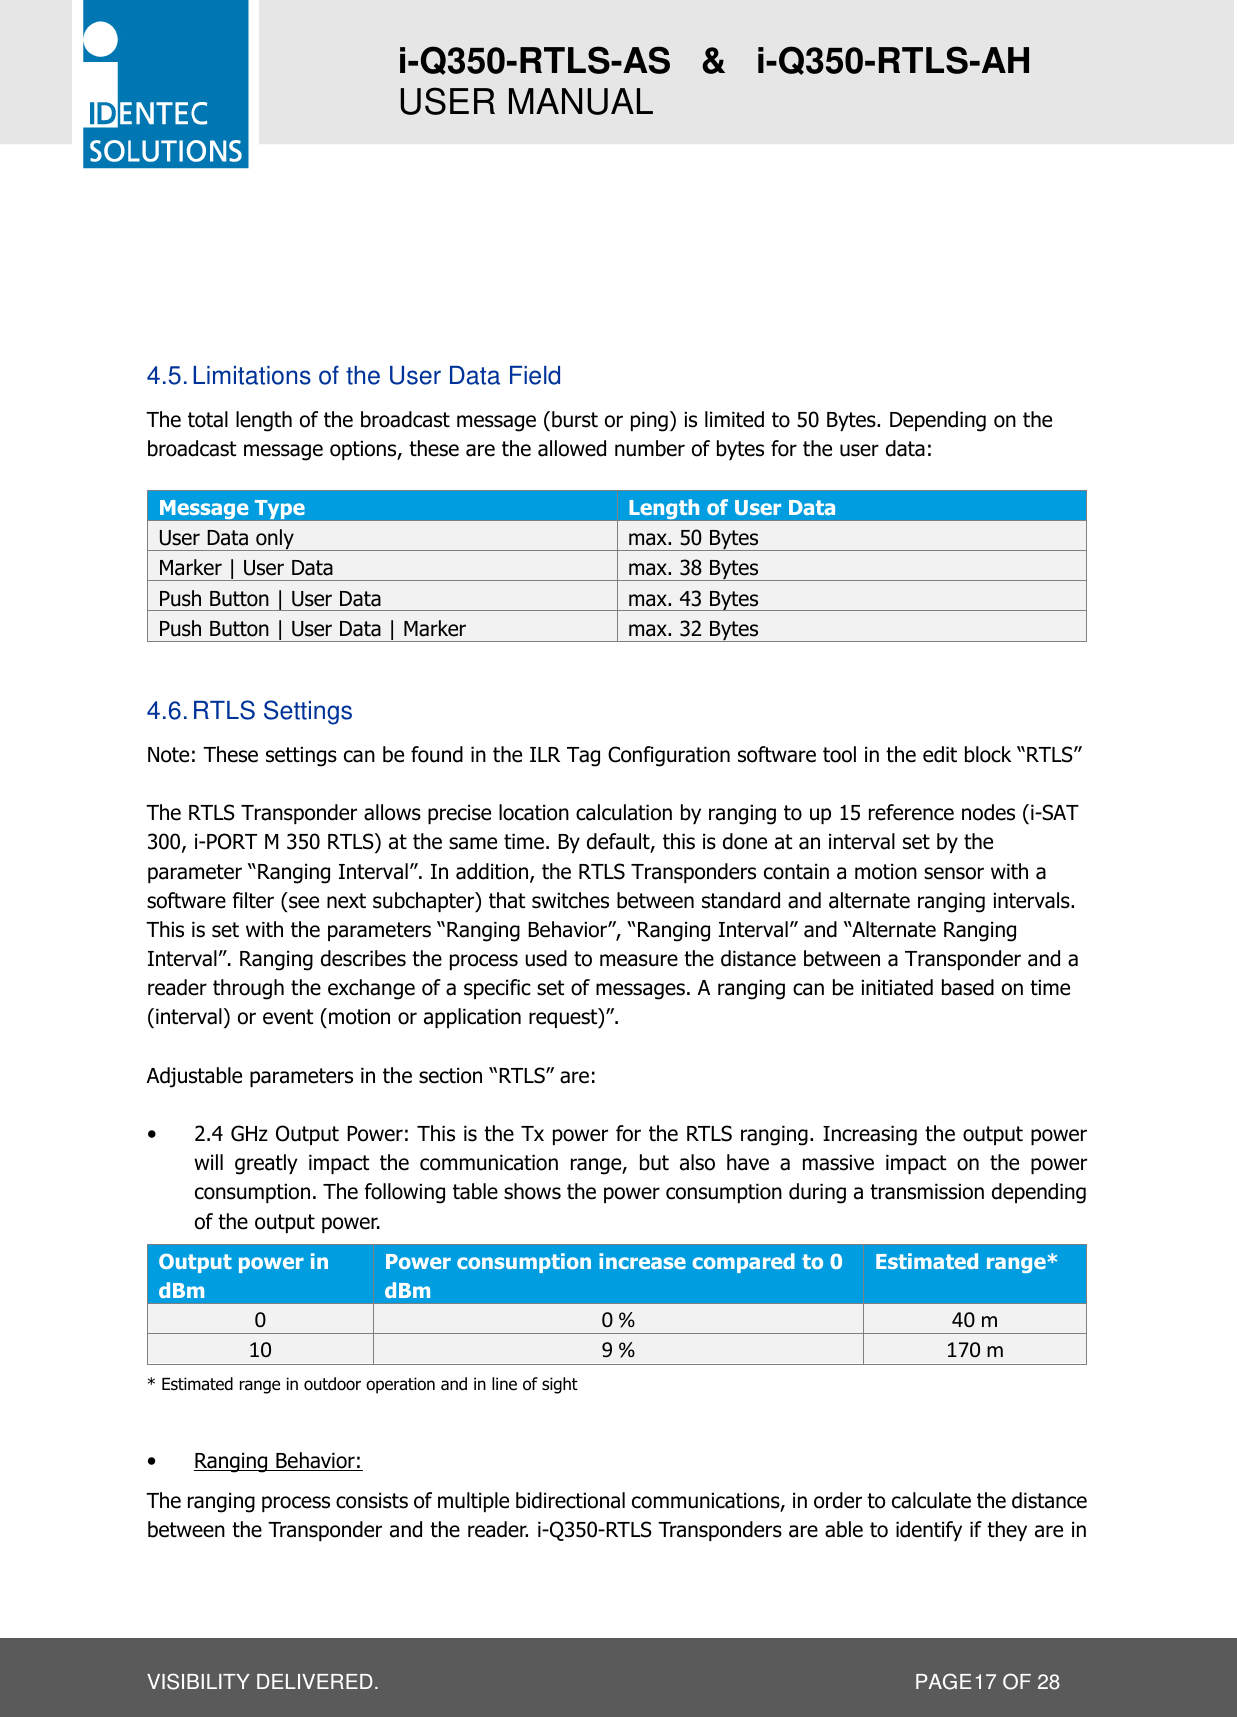 i-Q350-RTLS-AS   &amp;   i-Q350-RTLS-AH   USER MANUAL  VISIBILITY DELIVERED.                   PAGE 17 OF 28     4.5. Limitations of the User Data Field The total length of the broadcast message (burst or ping) is limited to 50 Bytes. Depending on the broadcast message options, these are the allowed number of bytes for the user data:  Message Type  Length of User Data User Data only  max. 50 Bytes Marker | User Data  max. 38 Bytes Push Button | User Data  max. 43 Bytes Push Button | User Data | Marker  max. 32 Bytes  4.6. RTLS Settings Note: These settings can be found in the ILR Tag Configuration software tool in the edit block “RTLS”  The RTLS Transponder allows precise location calculation by ranging to up 15 reference nodes (i-SAT 300, i-PORT M 350 RTLS) at the same time. By default, this is done at an interval set by the parameter “Ranging Interval”. In addition, the RTLS Transponders contain a motion sensor with a software filter (see next subchapter) that switches between standard and alternate ranging intervals. This is set with the parameters “Ranging Behavior”, “Ranging Interval” and “Alternate Ranging Interval”. Ranging describes the process used to measure the distance between a Transponder and a reader through the exchange of a specific set of messages. A ranging can be initiated based on time (interval) or event (motion or application request)”.  Adjustable parameters in the section “RTLS” are:  • 2.4 GHz Output Power: This is the Tx power for the RTLS ranging. Increasing the output power will  greatly  impact  the  communication  range,  but  also  have  a  massive  impact  on  the  power consumption. The following table shows the power consumption during a transmission depending of the output power.  Output power in dBm Power consumption increase compared to 0 dBm Estimated range* 0  0 %  40 m 10  9 %  170 m * Estimated range in outdoor operation and in line of sight  • Ranging Behavior: The ranging process consists of multiple bidirectional communications, in order to calculate the distance between the Transponder and the reader. i-Q350-RTLS Transponders are able to identify if they are in 